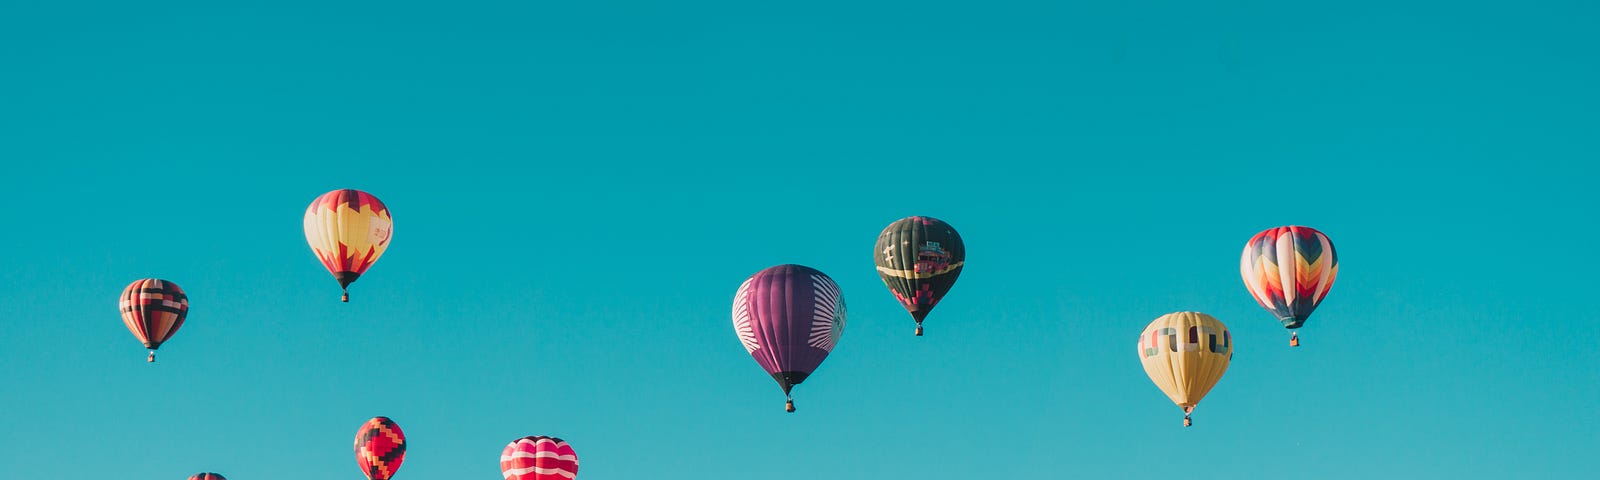 Dozens of colourful hot air balloons in a clear blue sky.